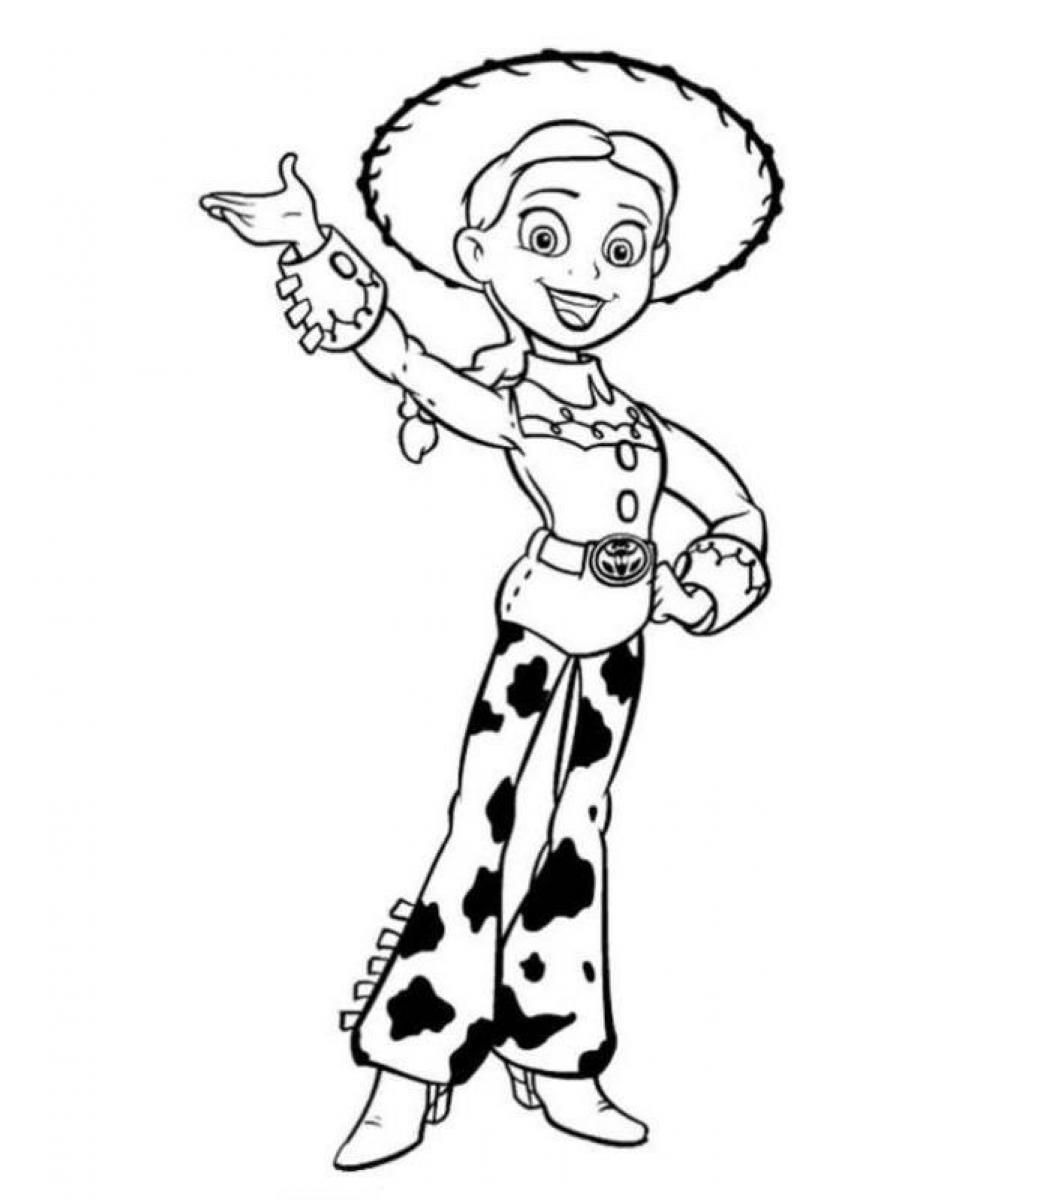 Free Printable Disney Toy Story Coloring Pages - Coloring Home